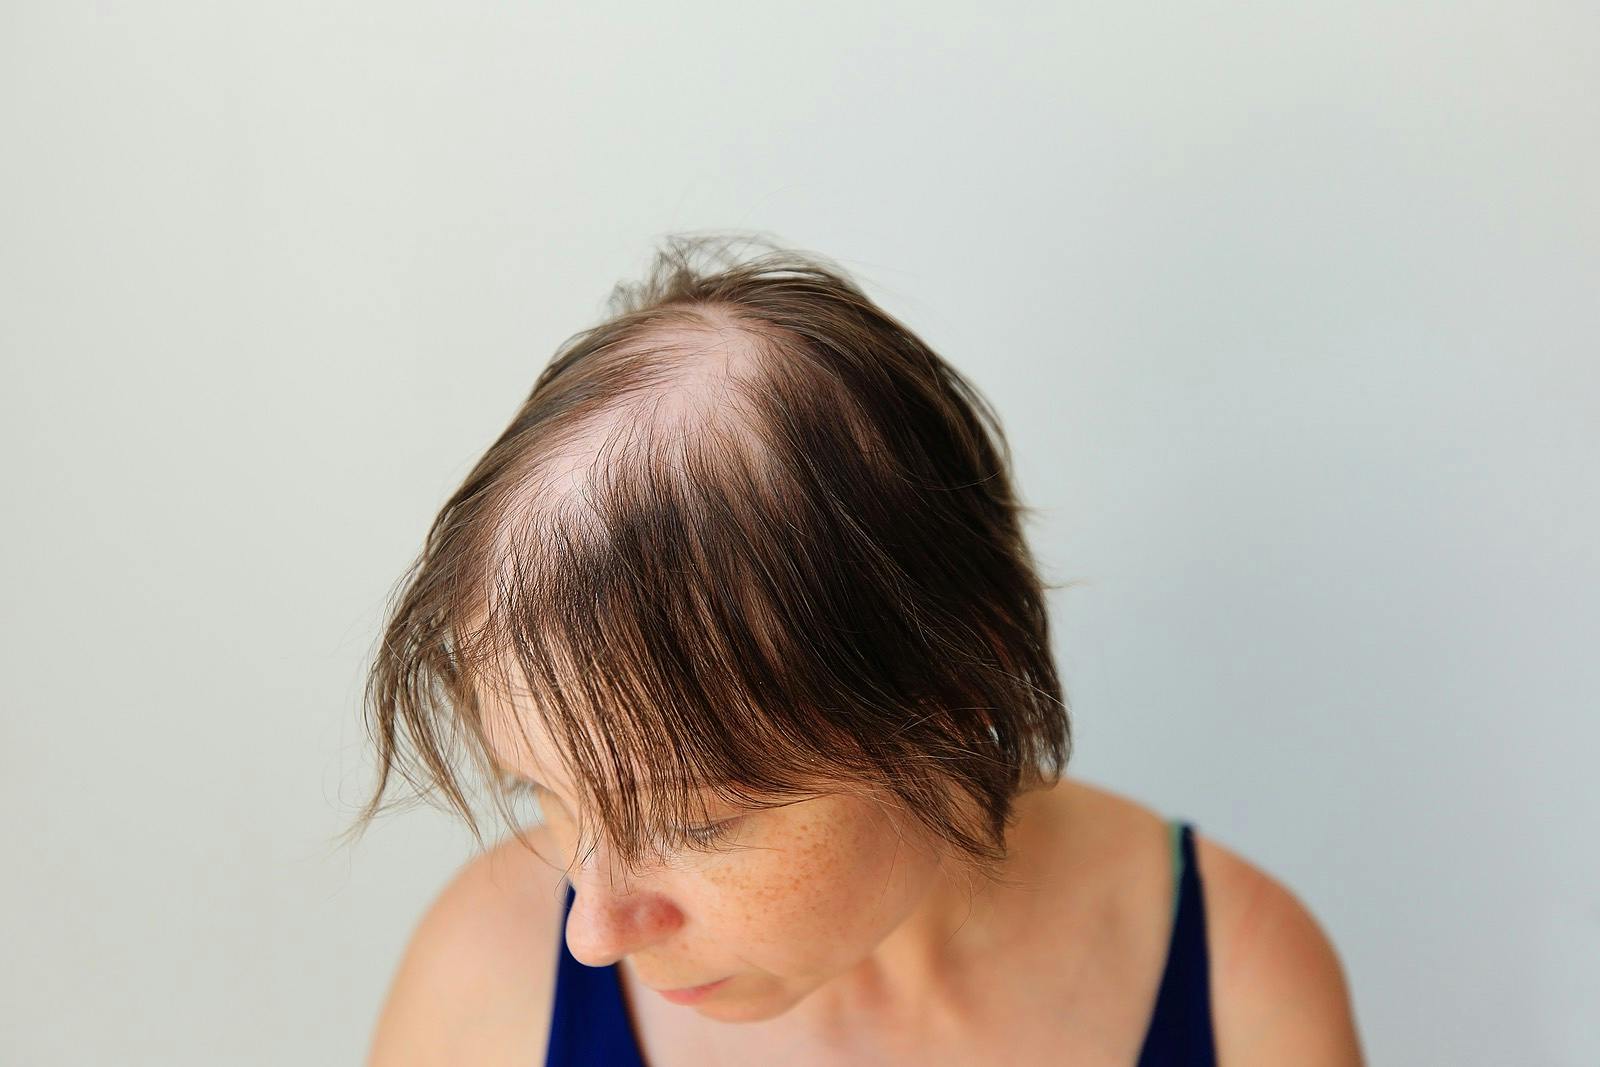 Hair loss in the form of alopecia areata. Bald head of a woman. Hair thinning after covid. Bald patches of total alopecia
